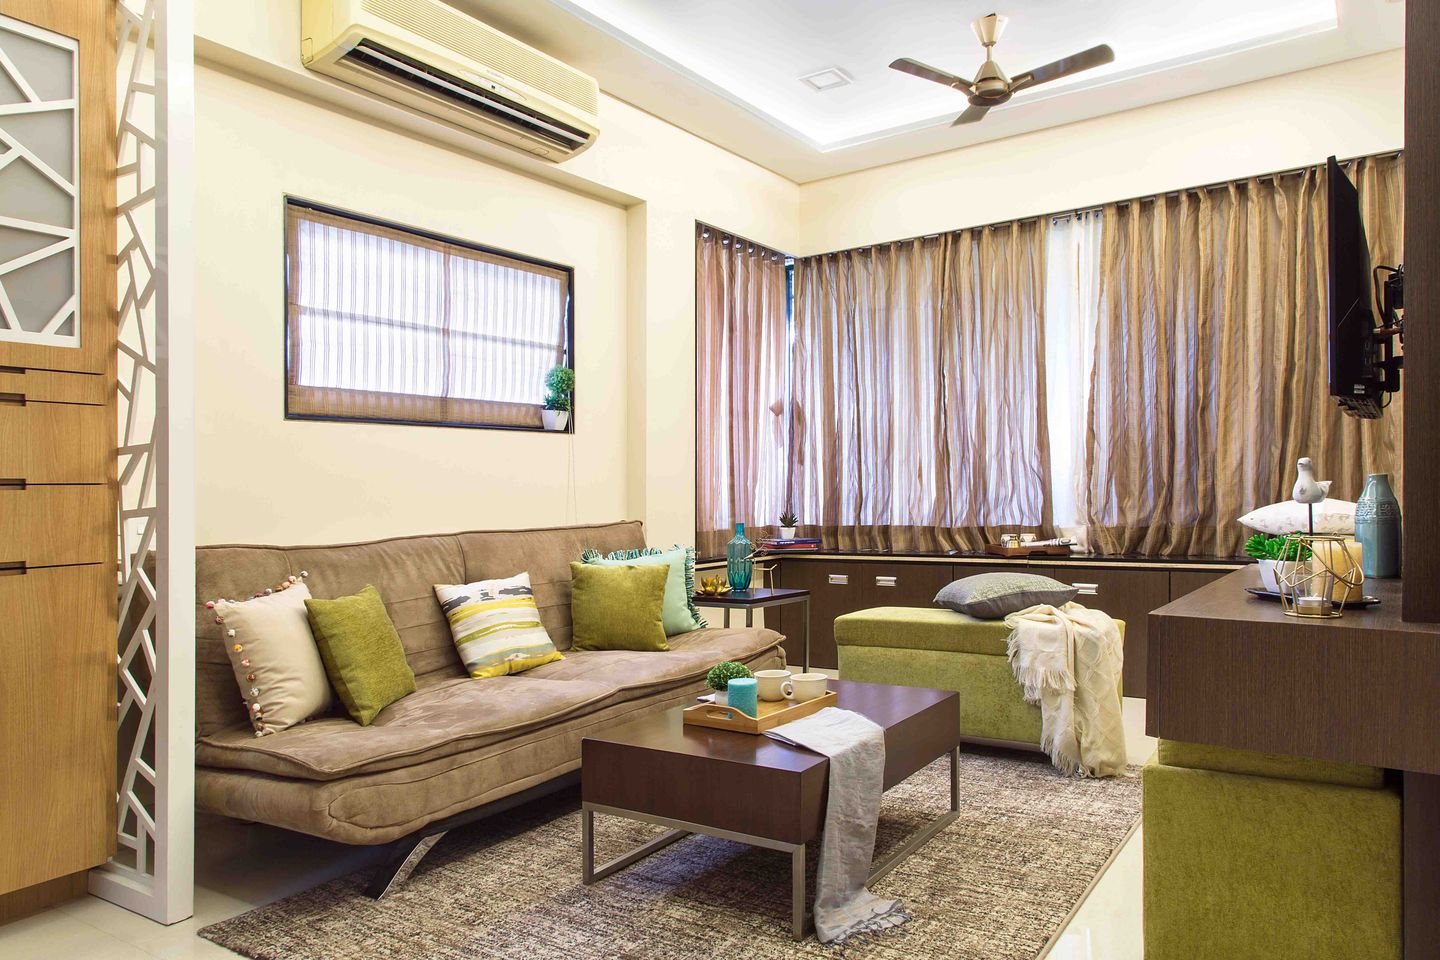 Contemporary 2-BHK Flat In Mumbai With Beige And Green Living Room